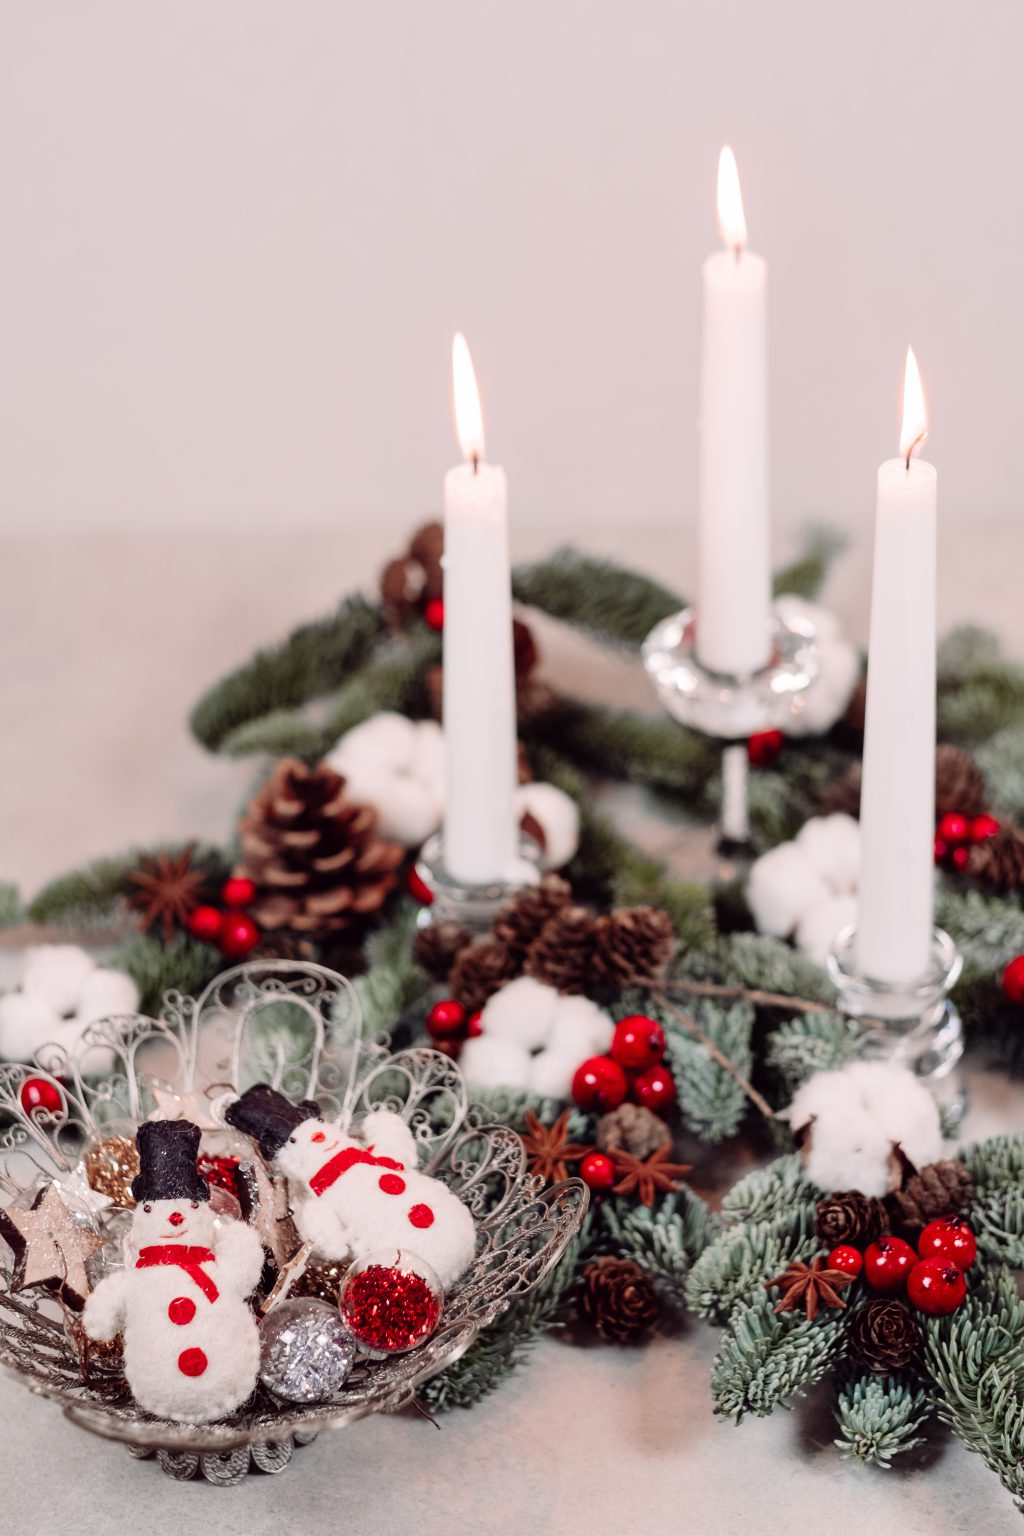 Christmas spruce decoration with candles and snowmen - free stock photo